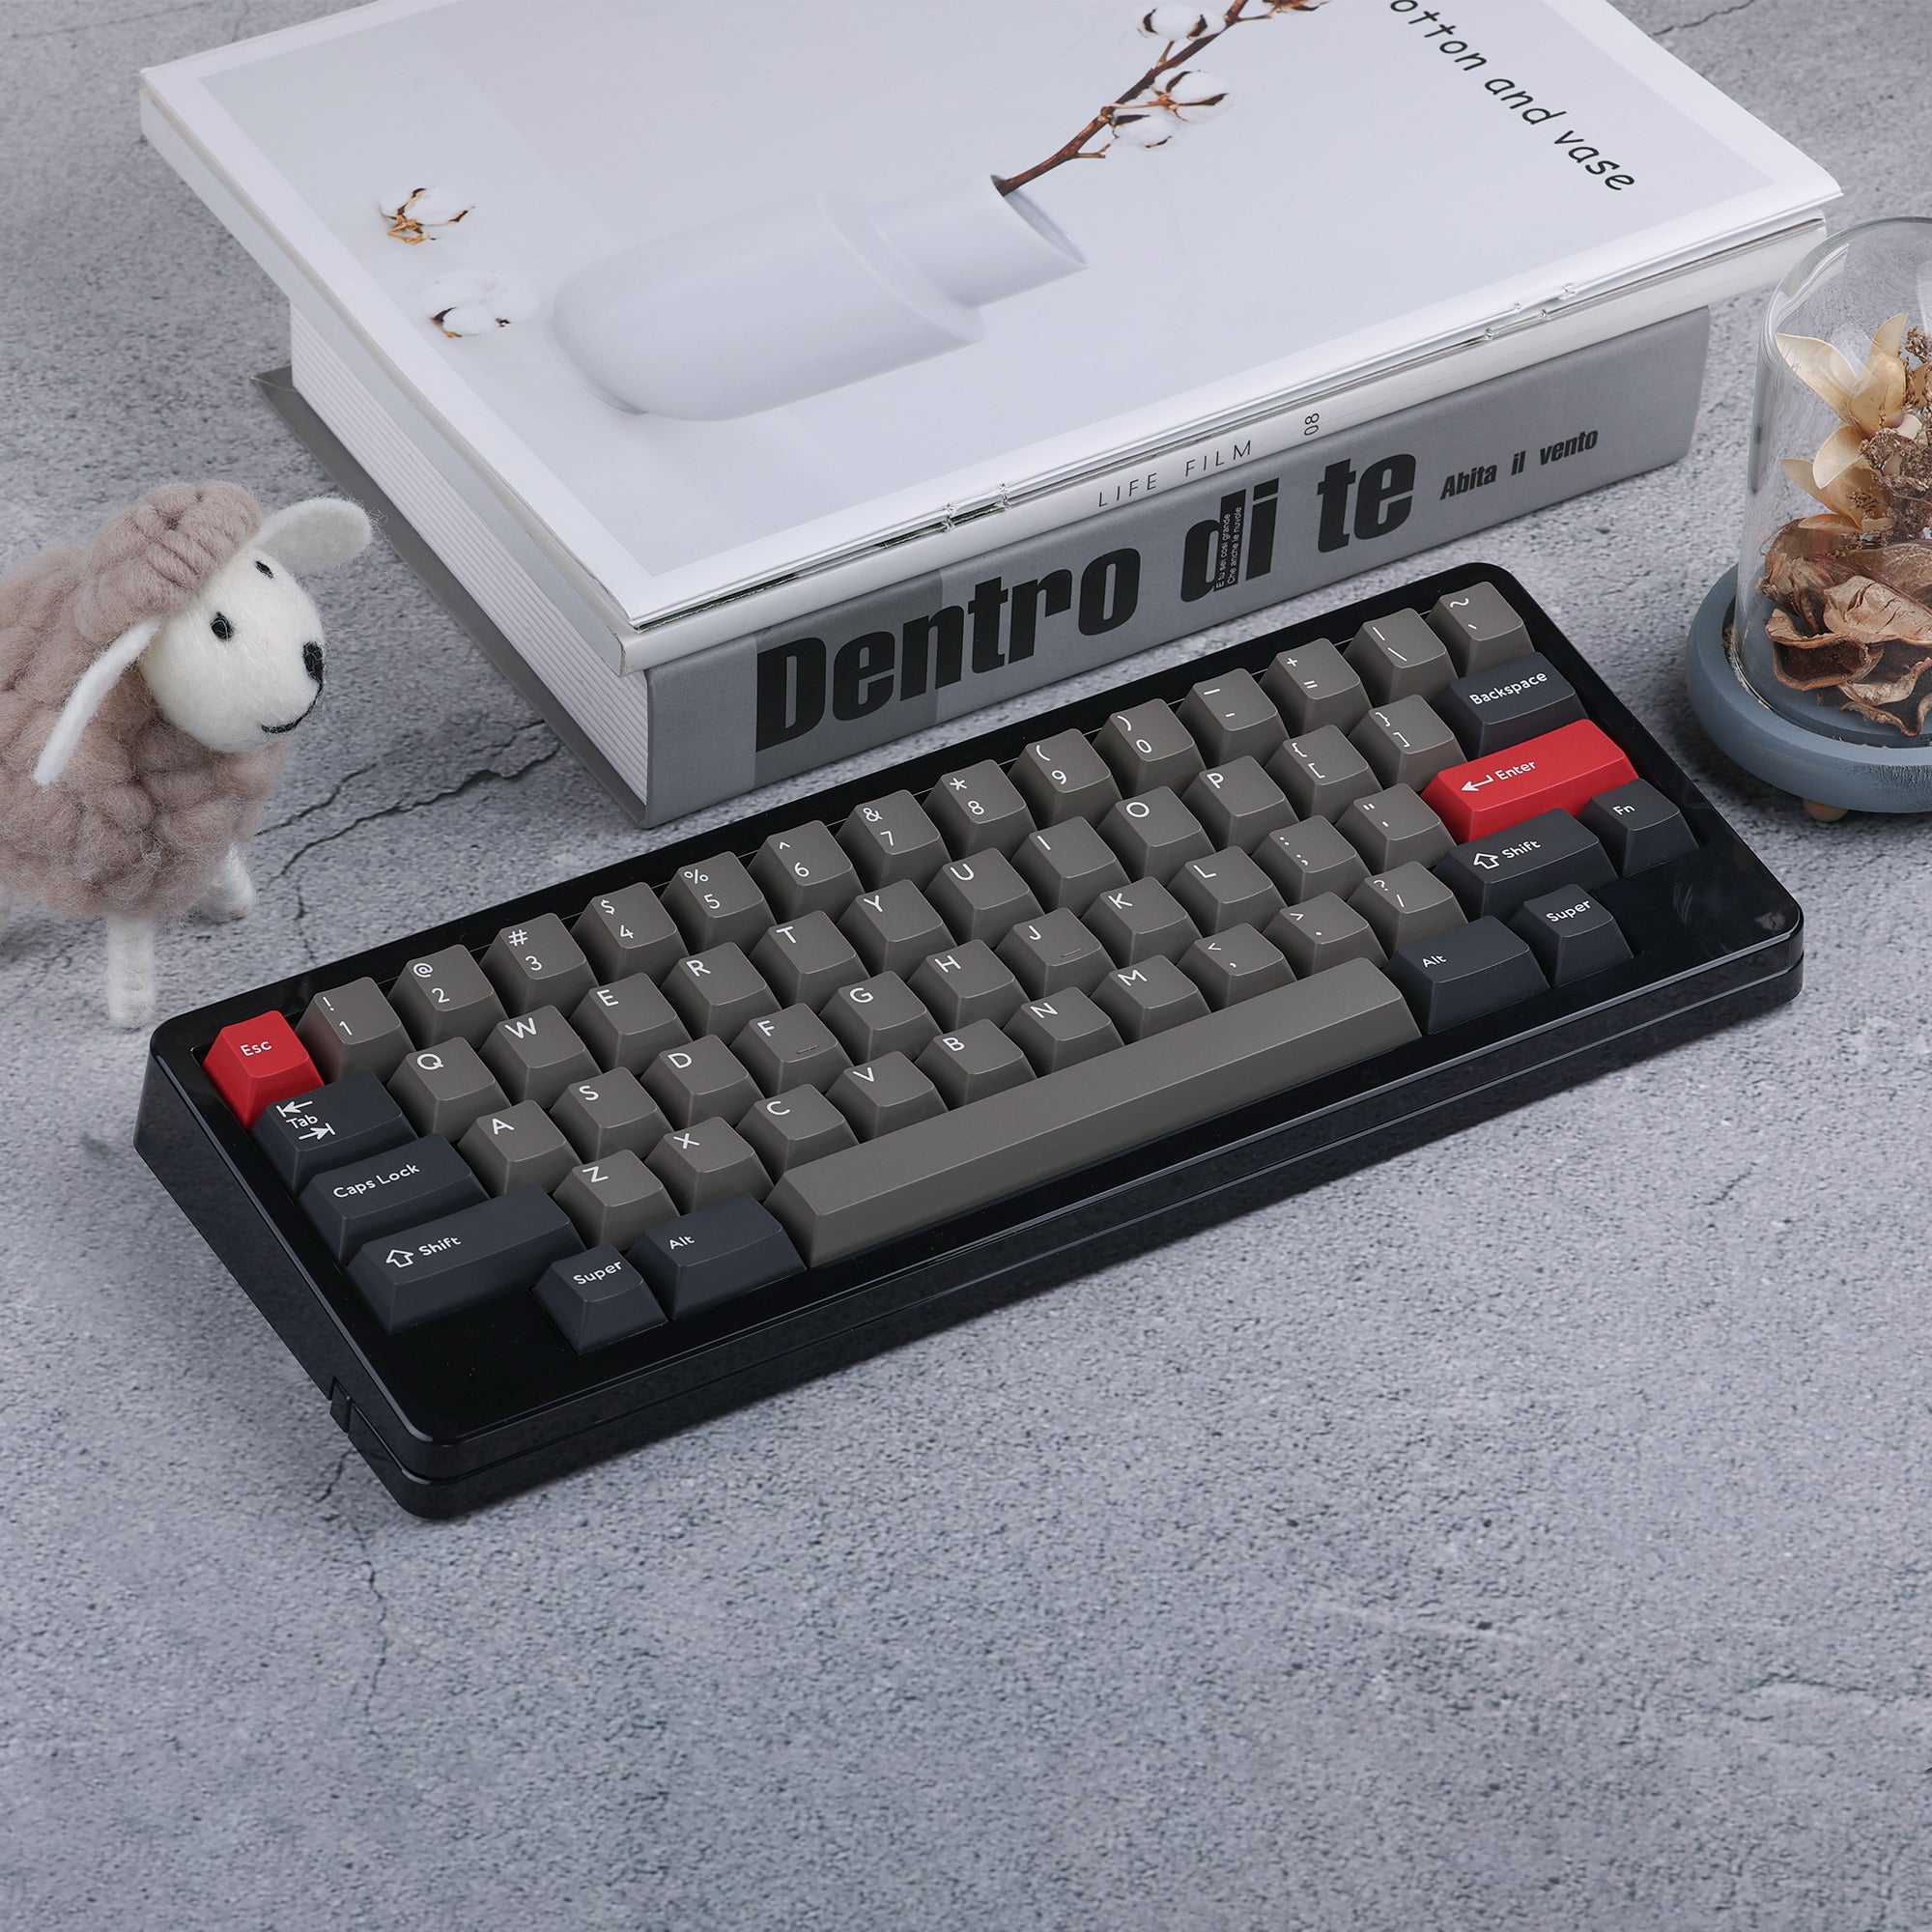 KBDfans Custom Keyboard Ready to use D60lite PC Hot-swap Mechanical Keyboard With PBTfans Dolch Keycaps